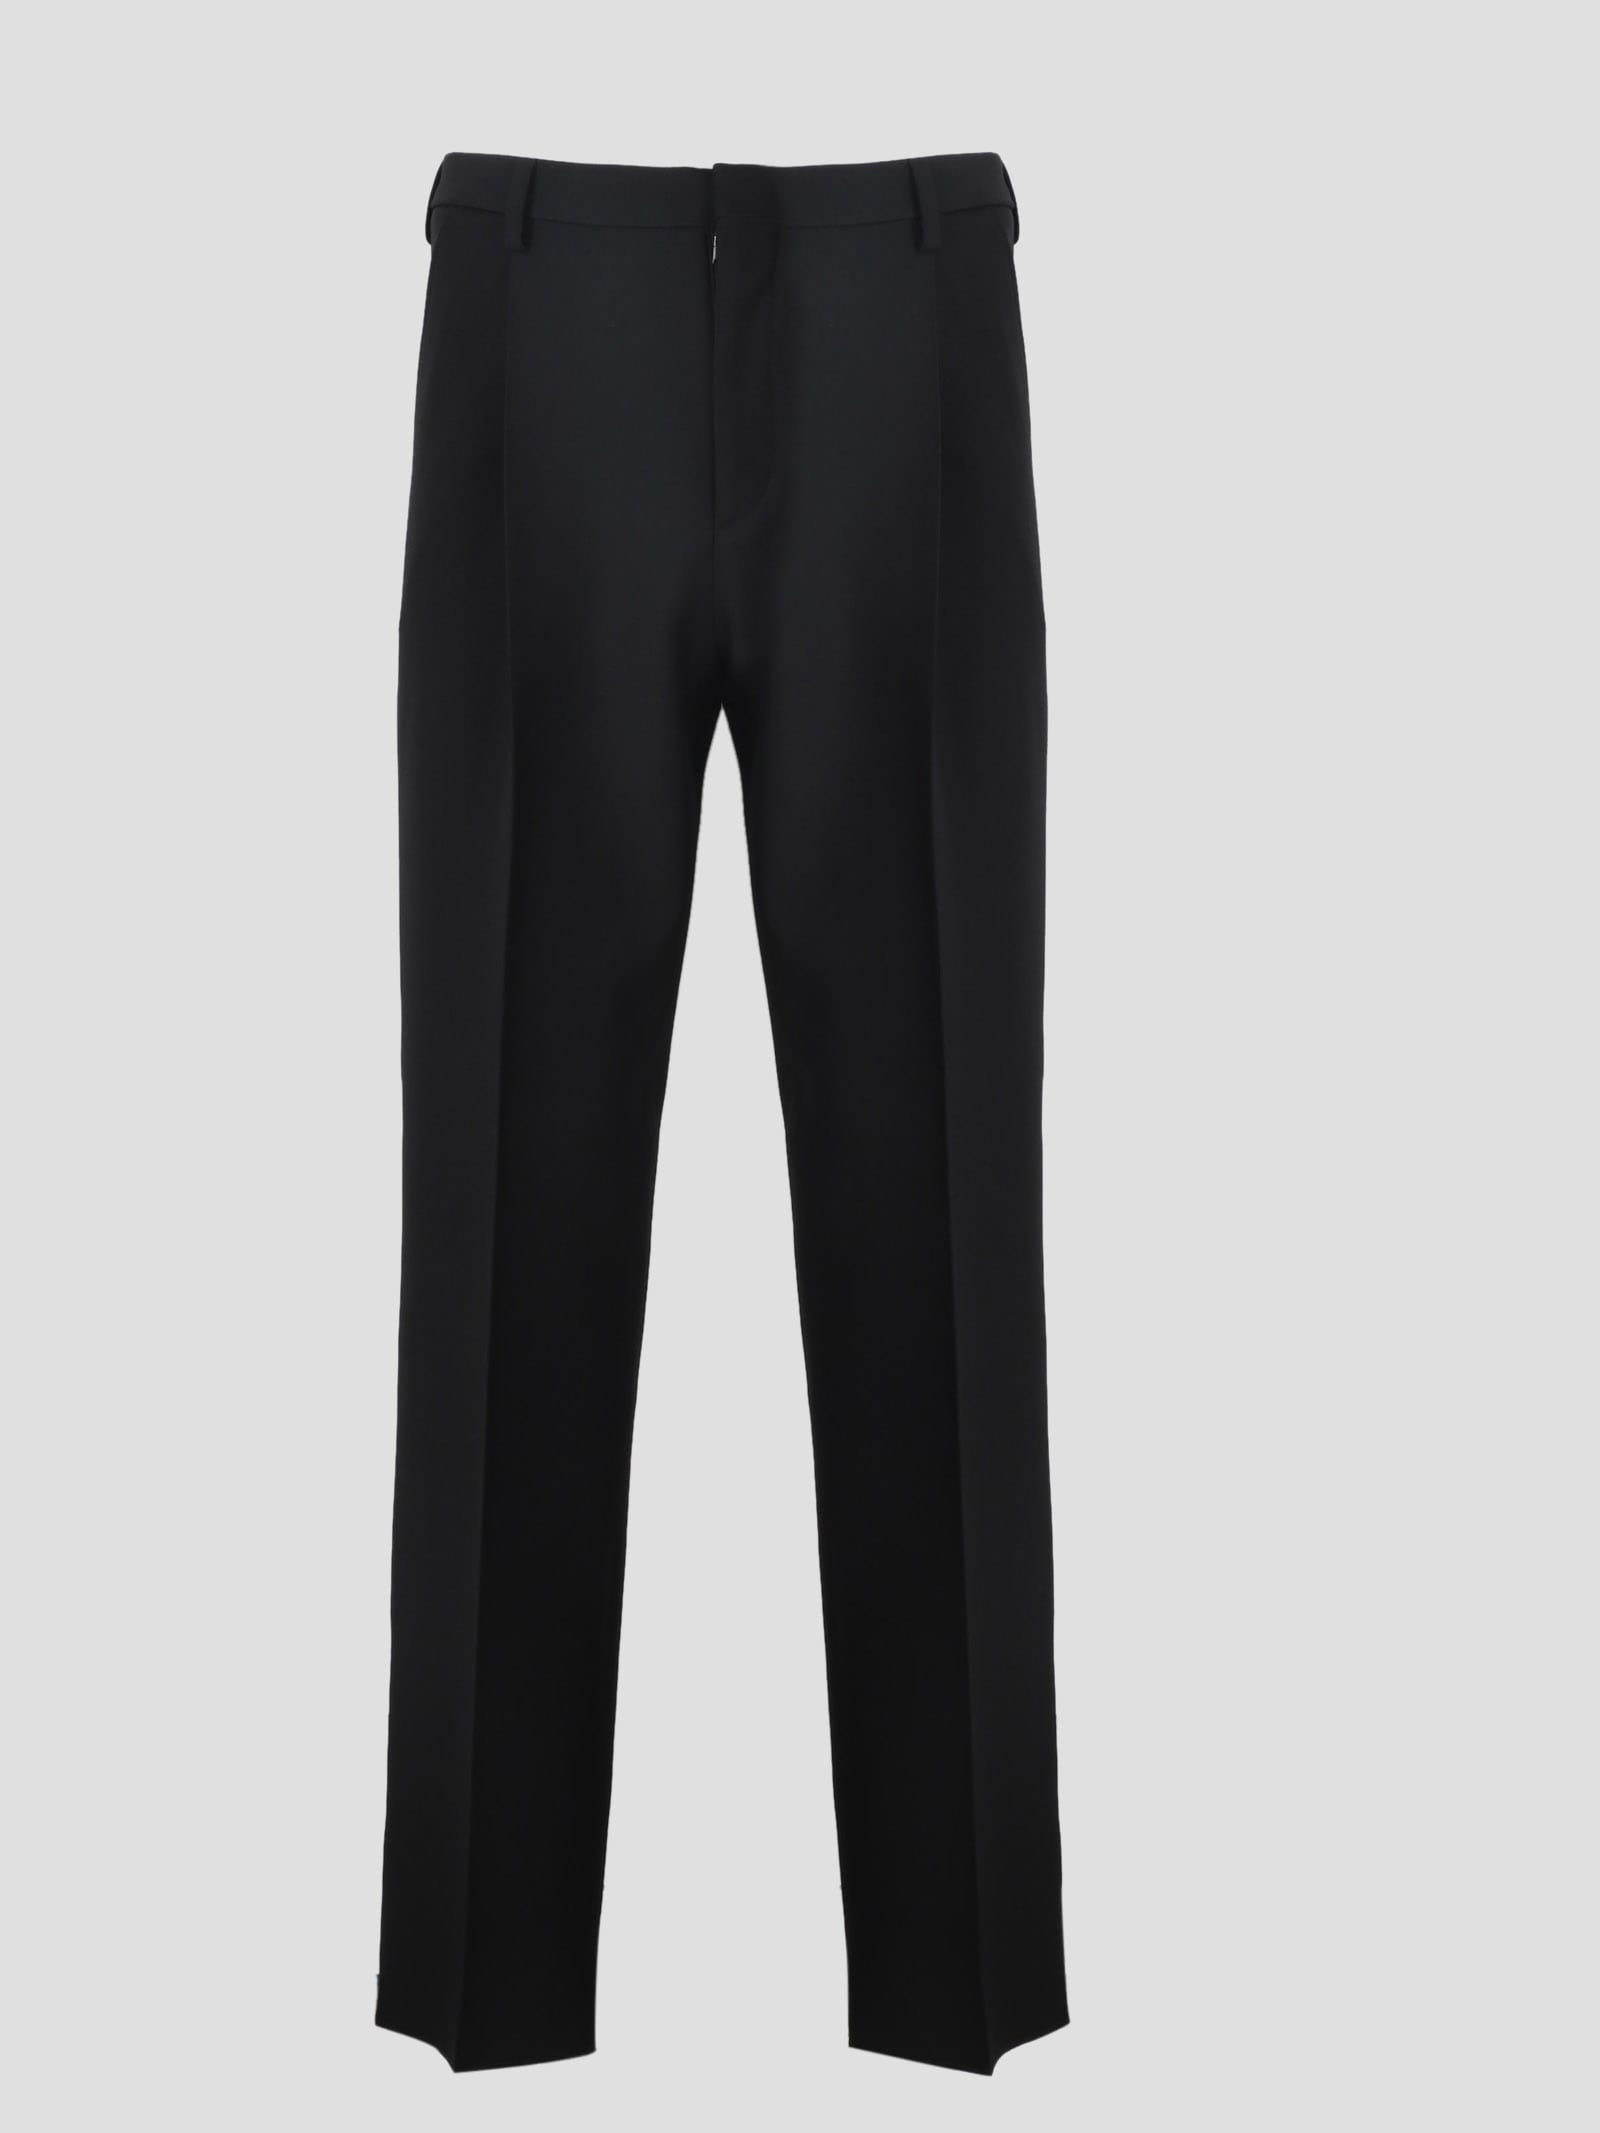 Valentino Crepe Couture Trousers